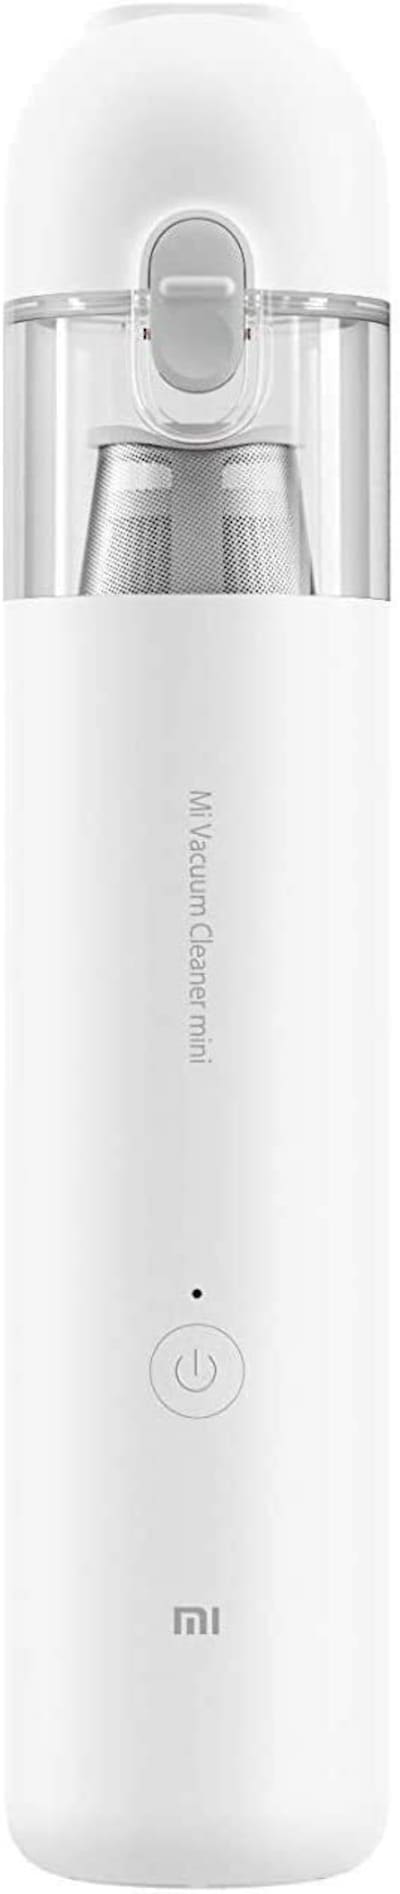 Buy Xiaomi Mi Temperature And Humidity Monitor Online - Shop Smartphones,  Tablets & Wearables on Carrefour UAE